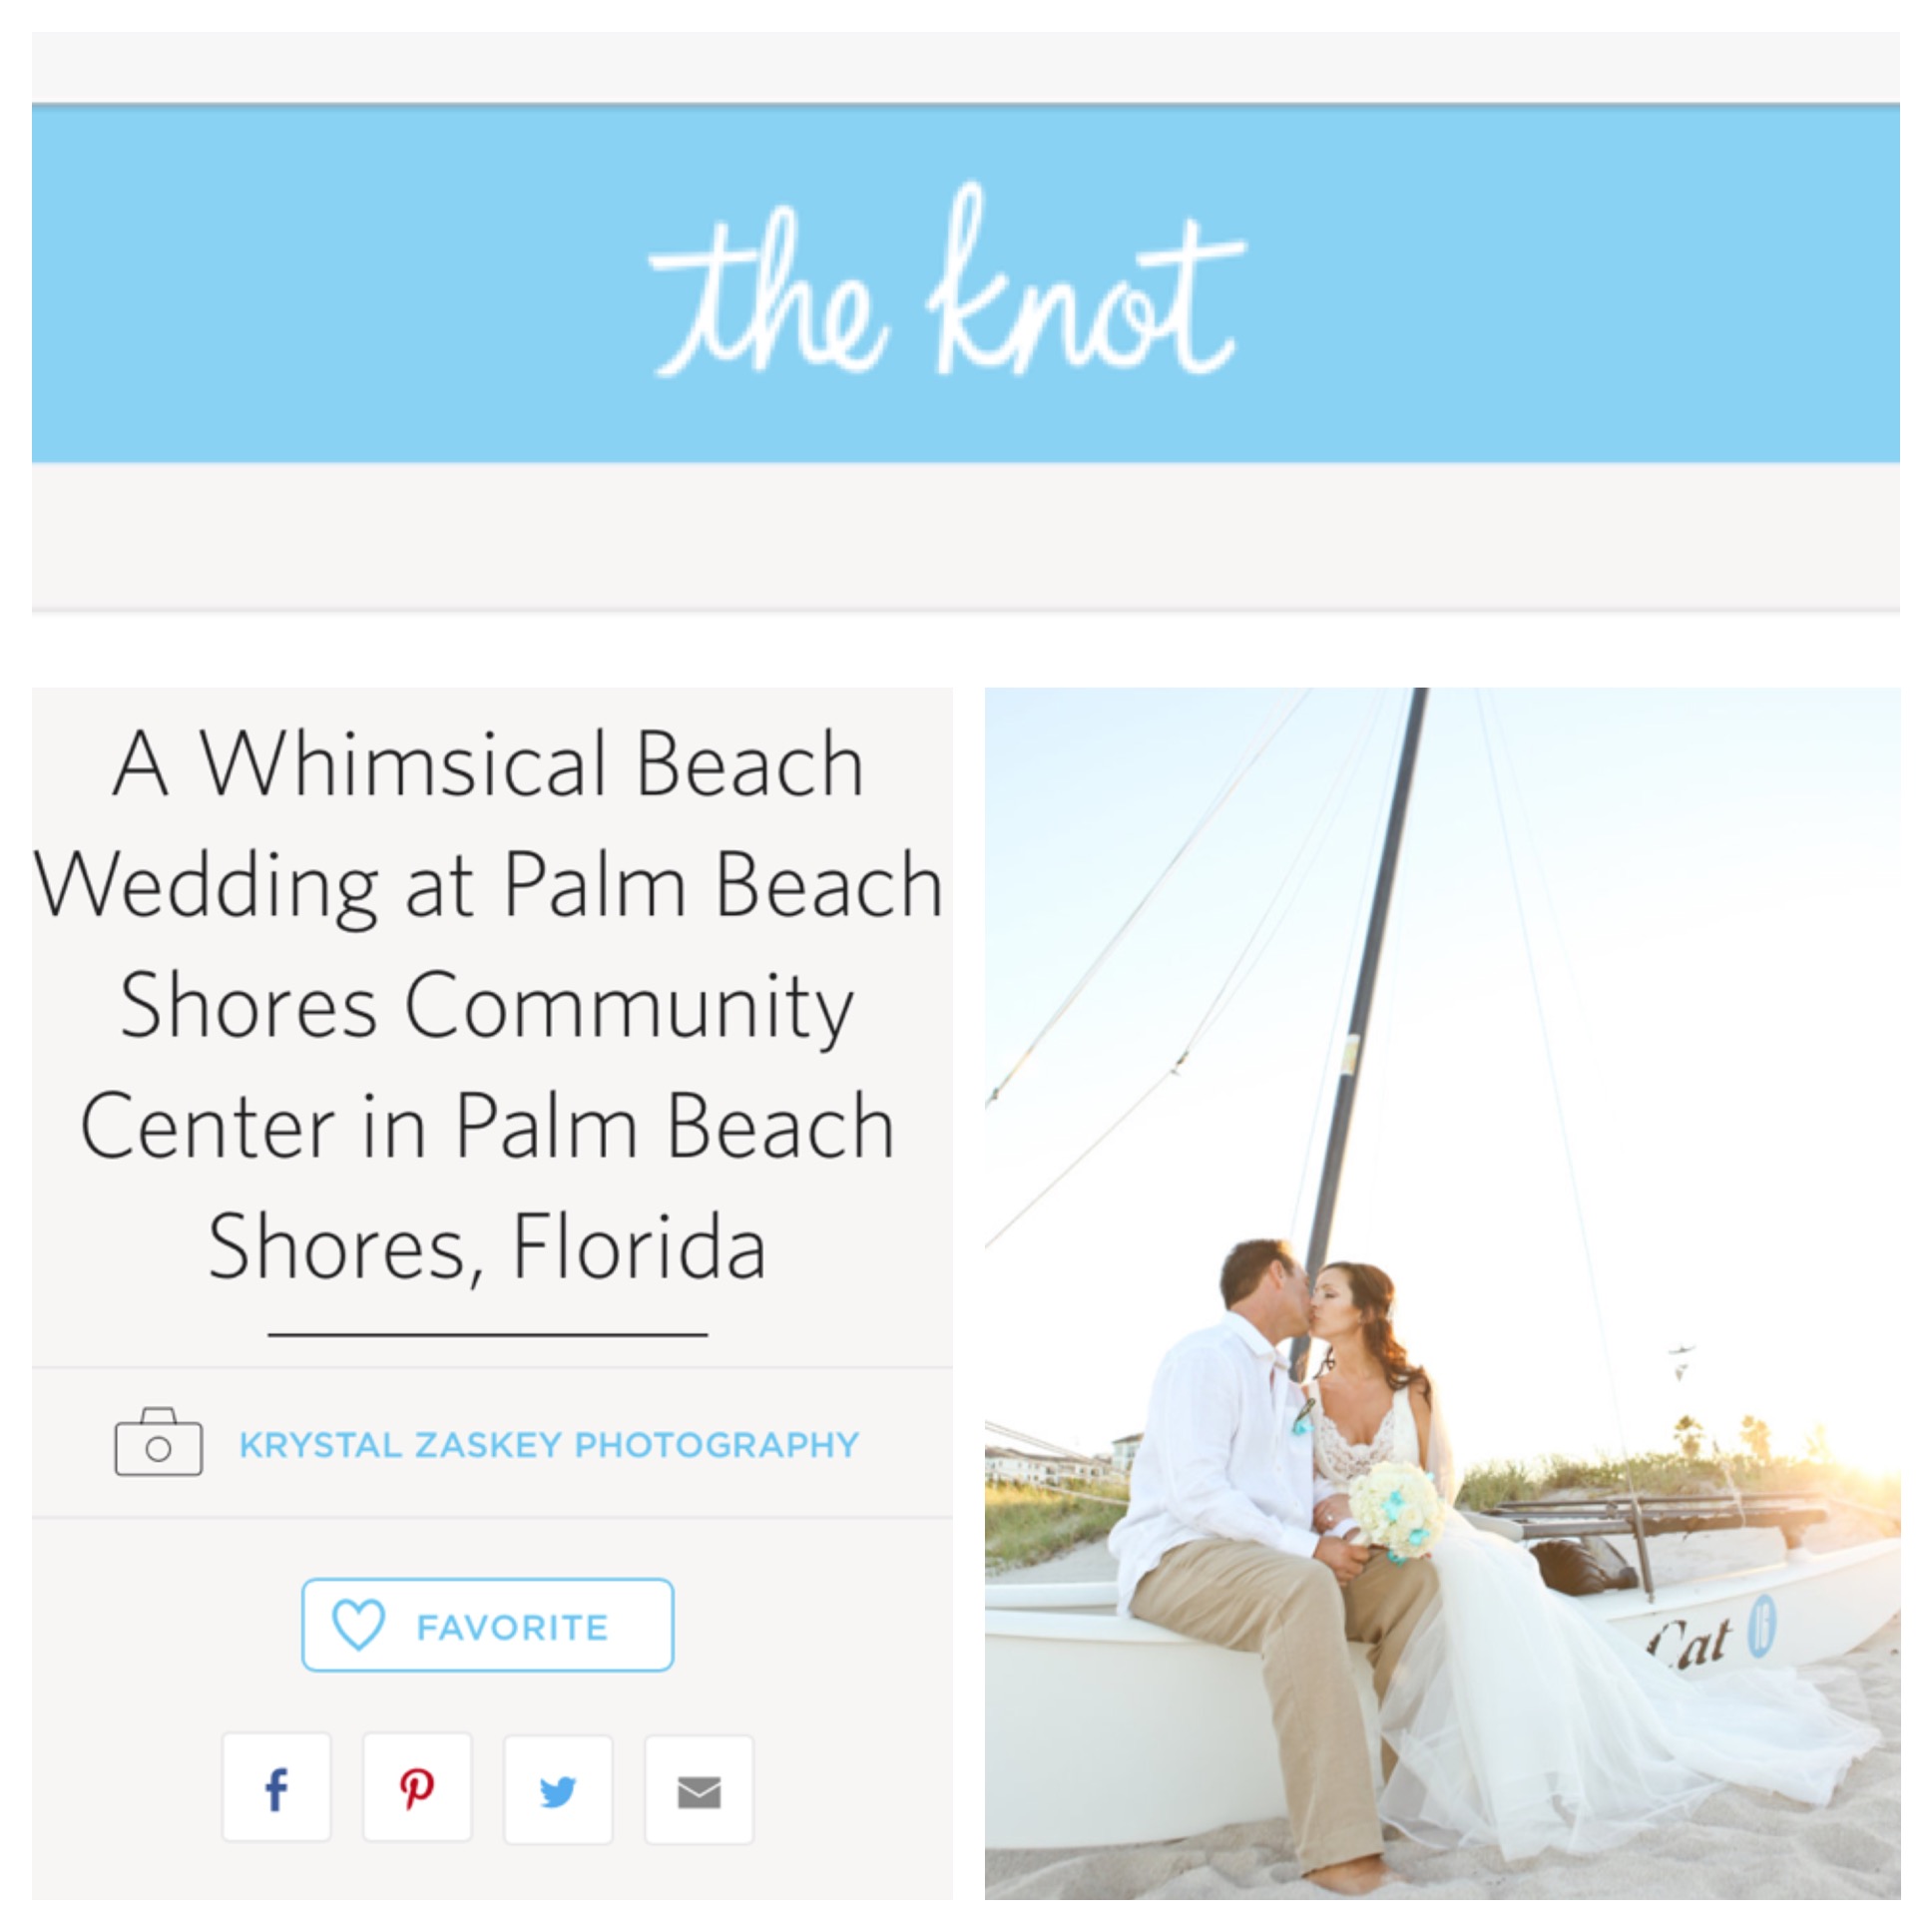 Whimsical and Elegant Beach Wedding on TheKnot | The Majestic Vision Wedding Planning | Palm Beach Shores in Palm Beach, FL | www.themajesticvision.com | Krystal Zaskey Photography